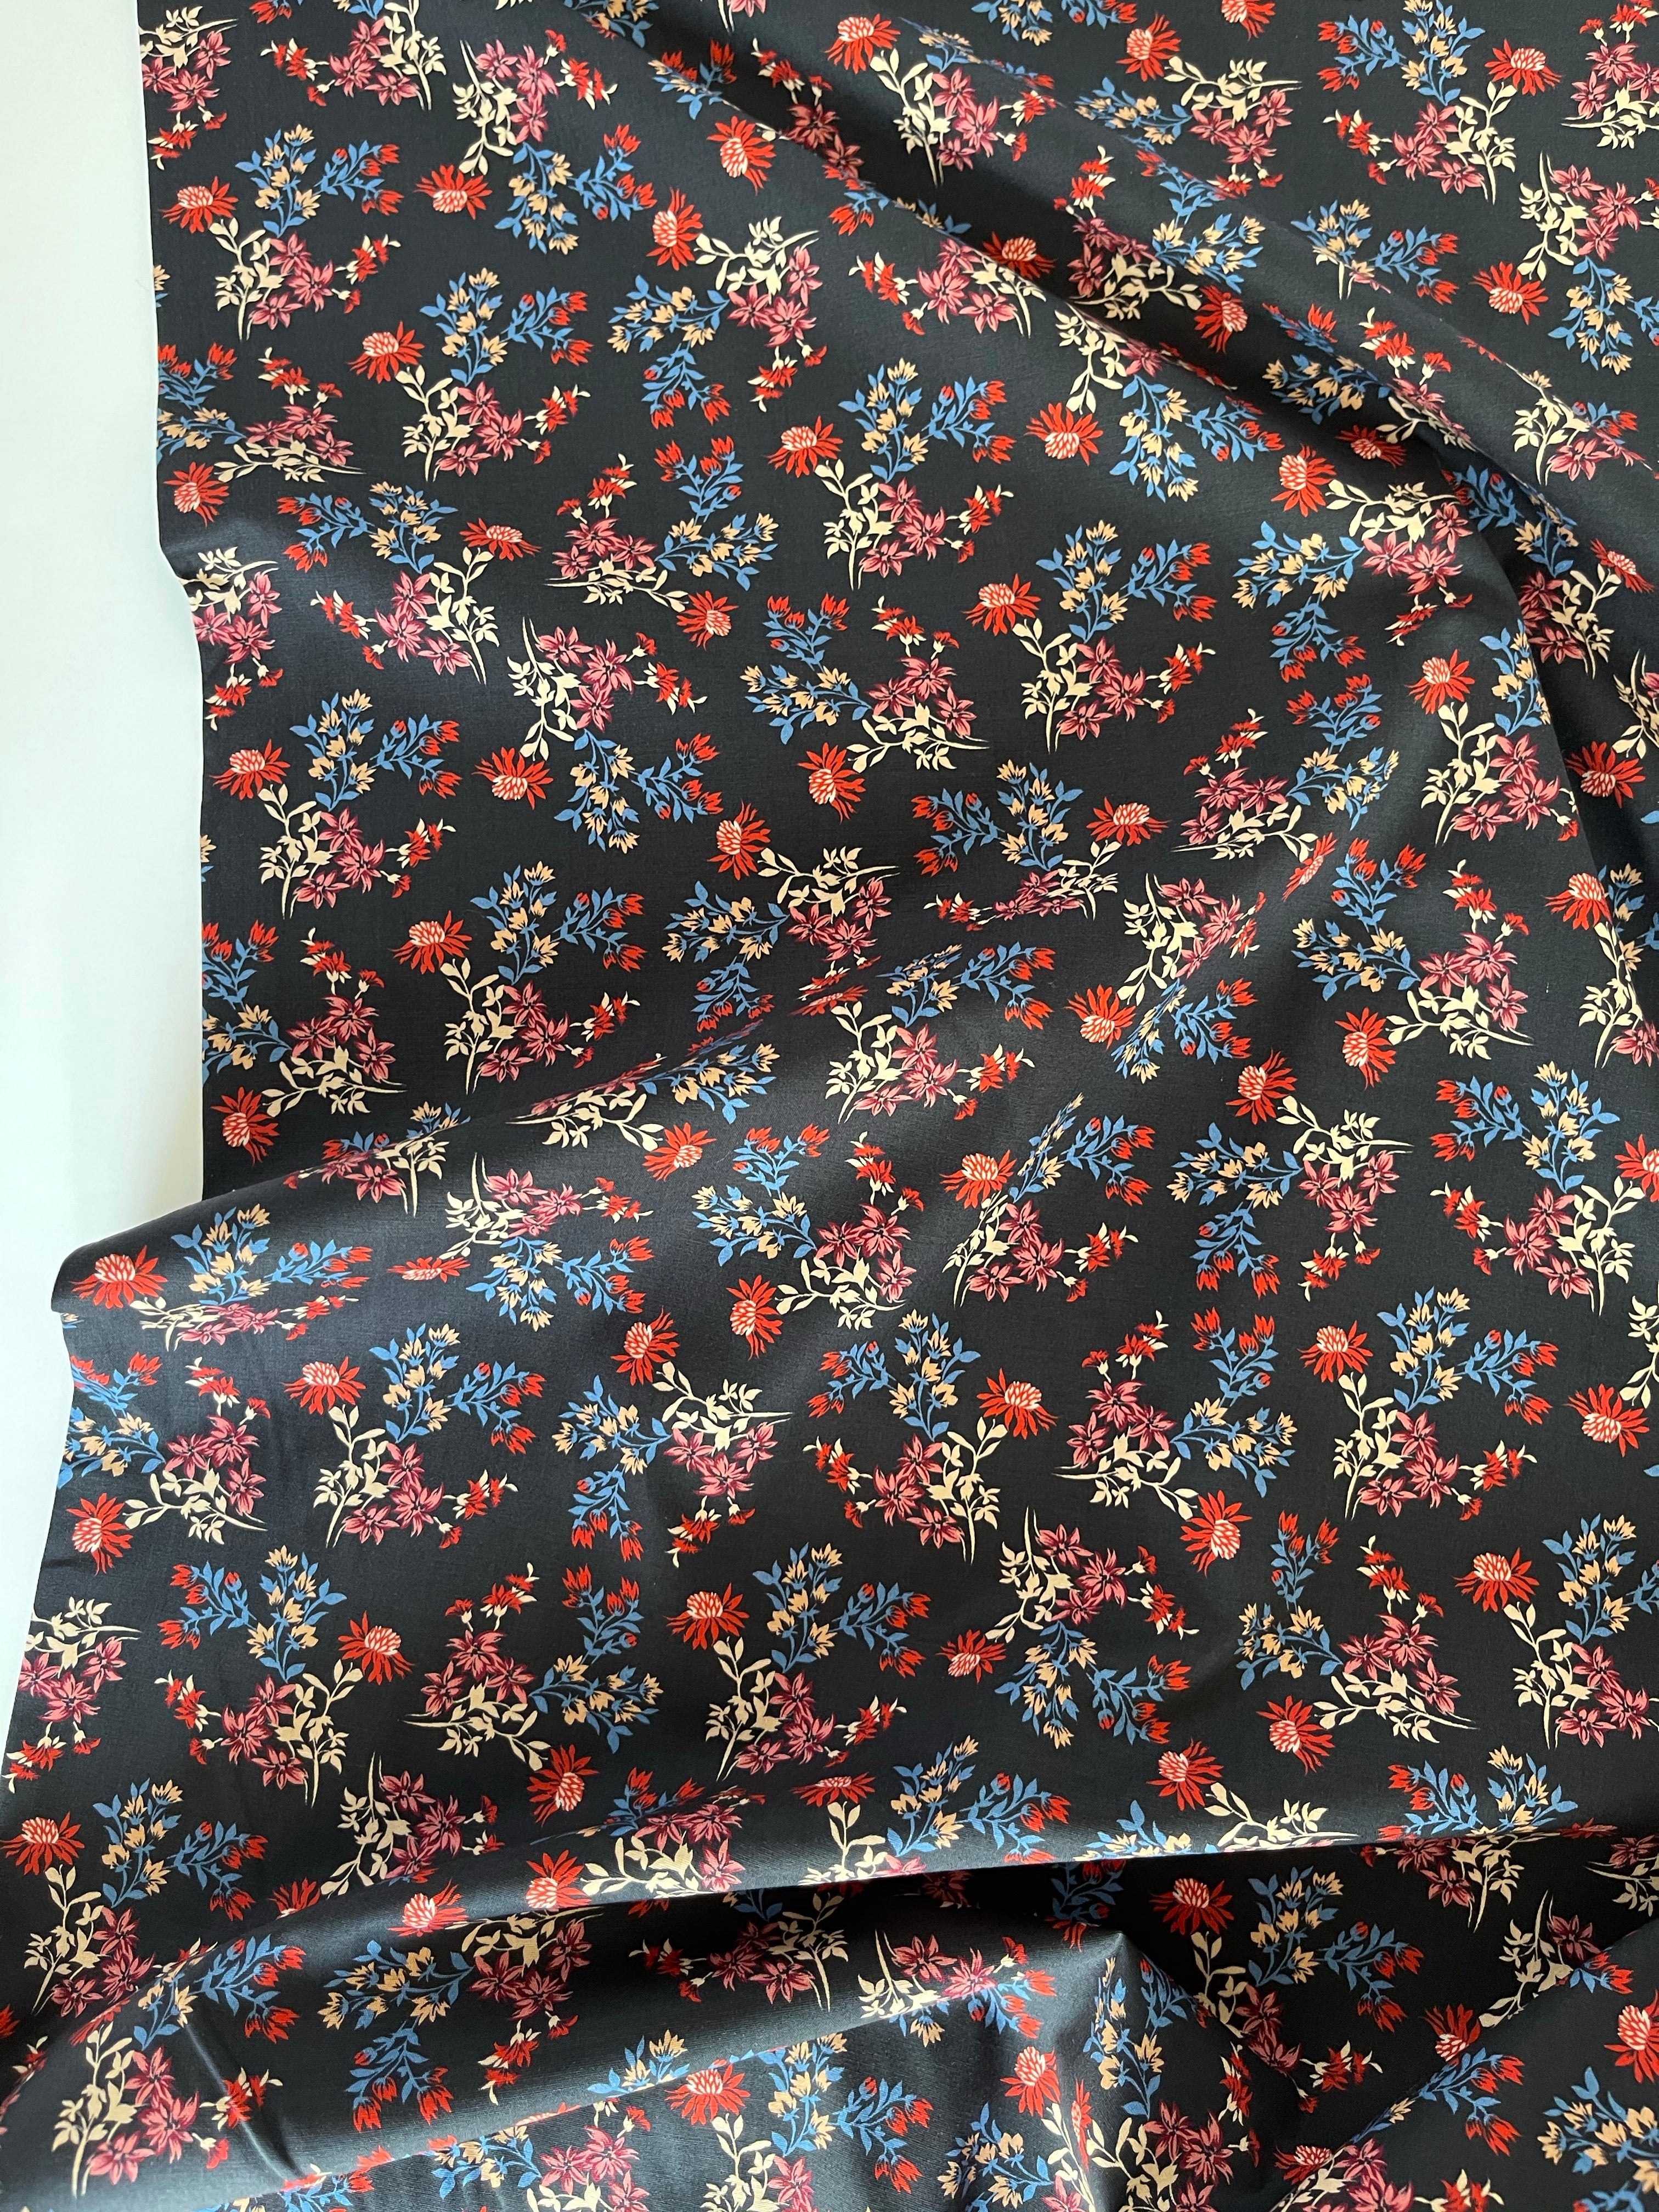 Atelier Jupe - Dried Flower Print Cotton-Stretch Fabric